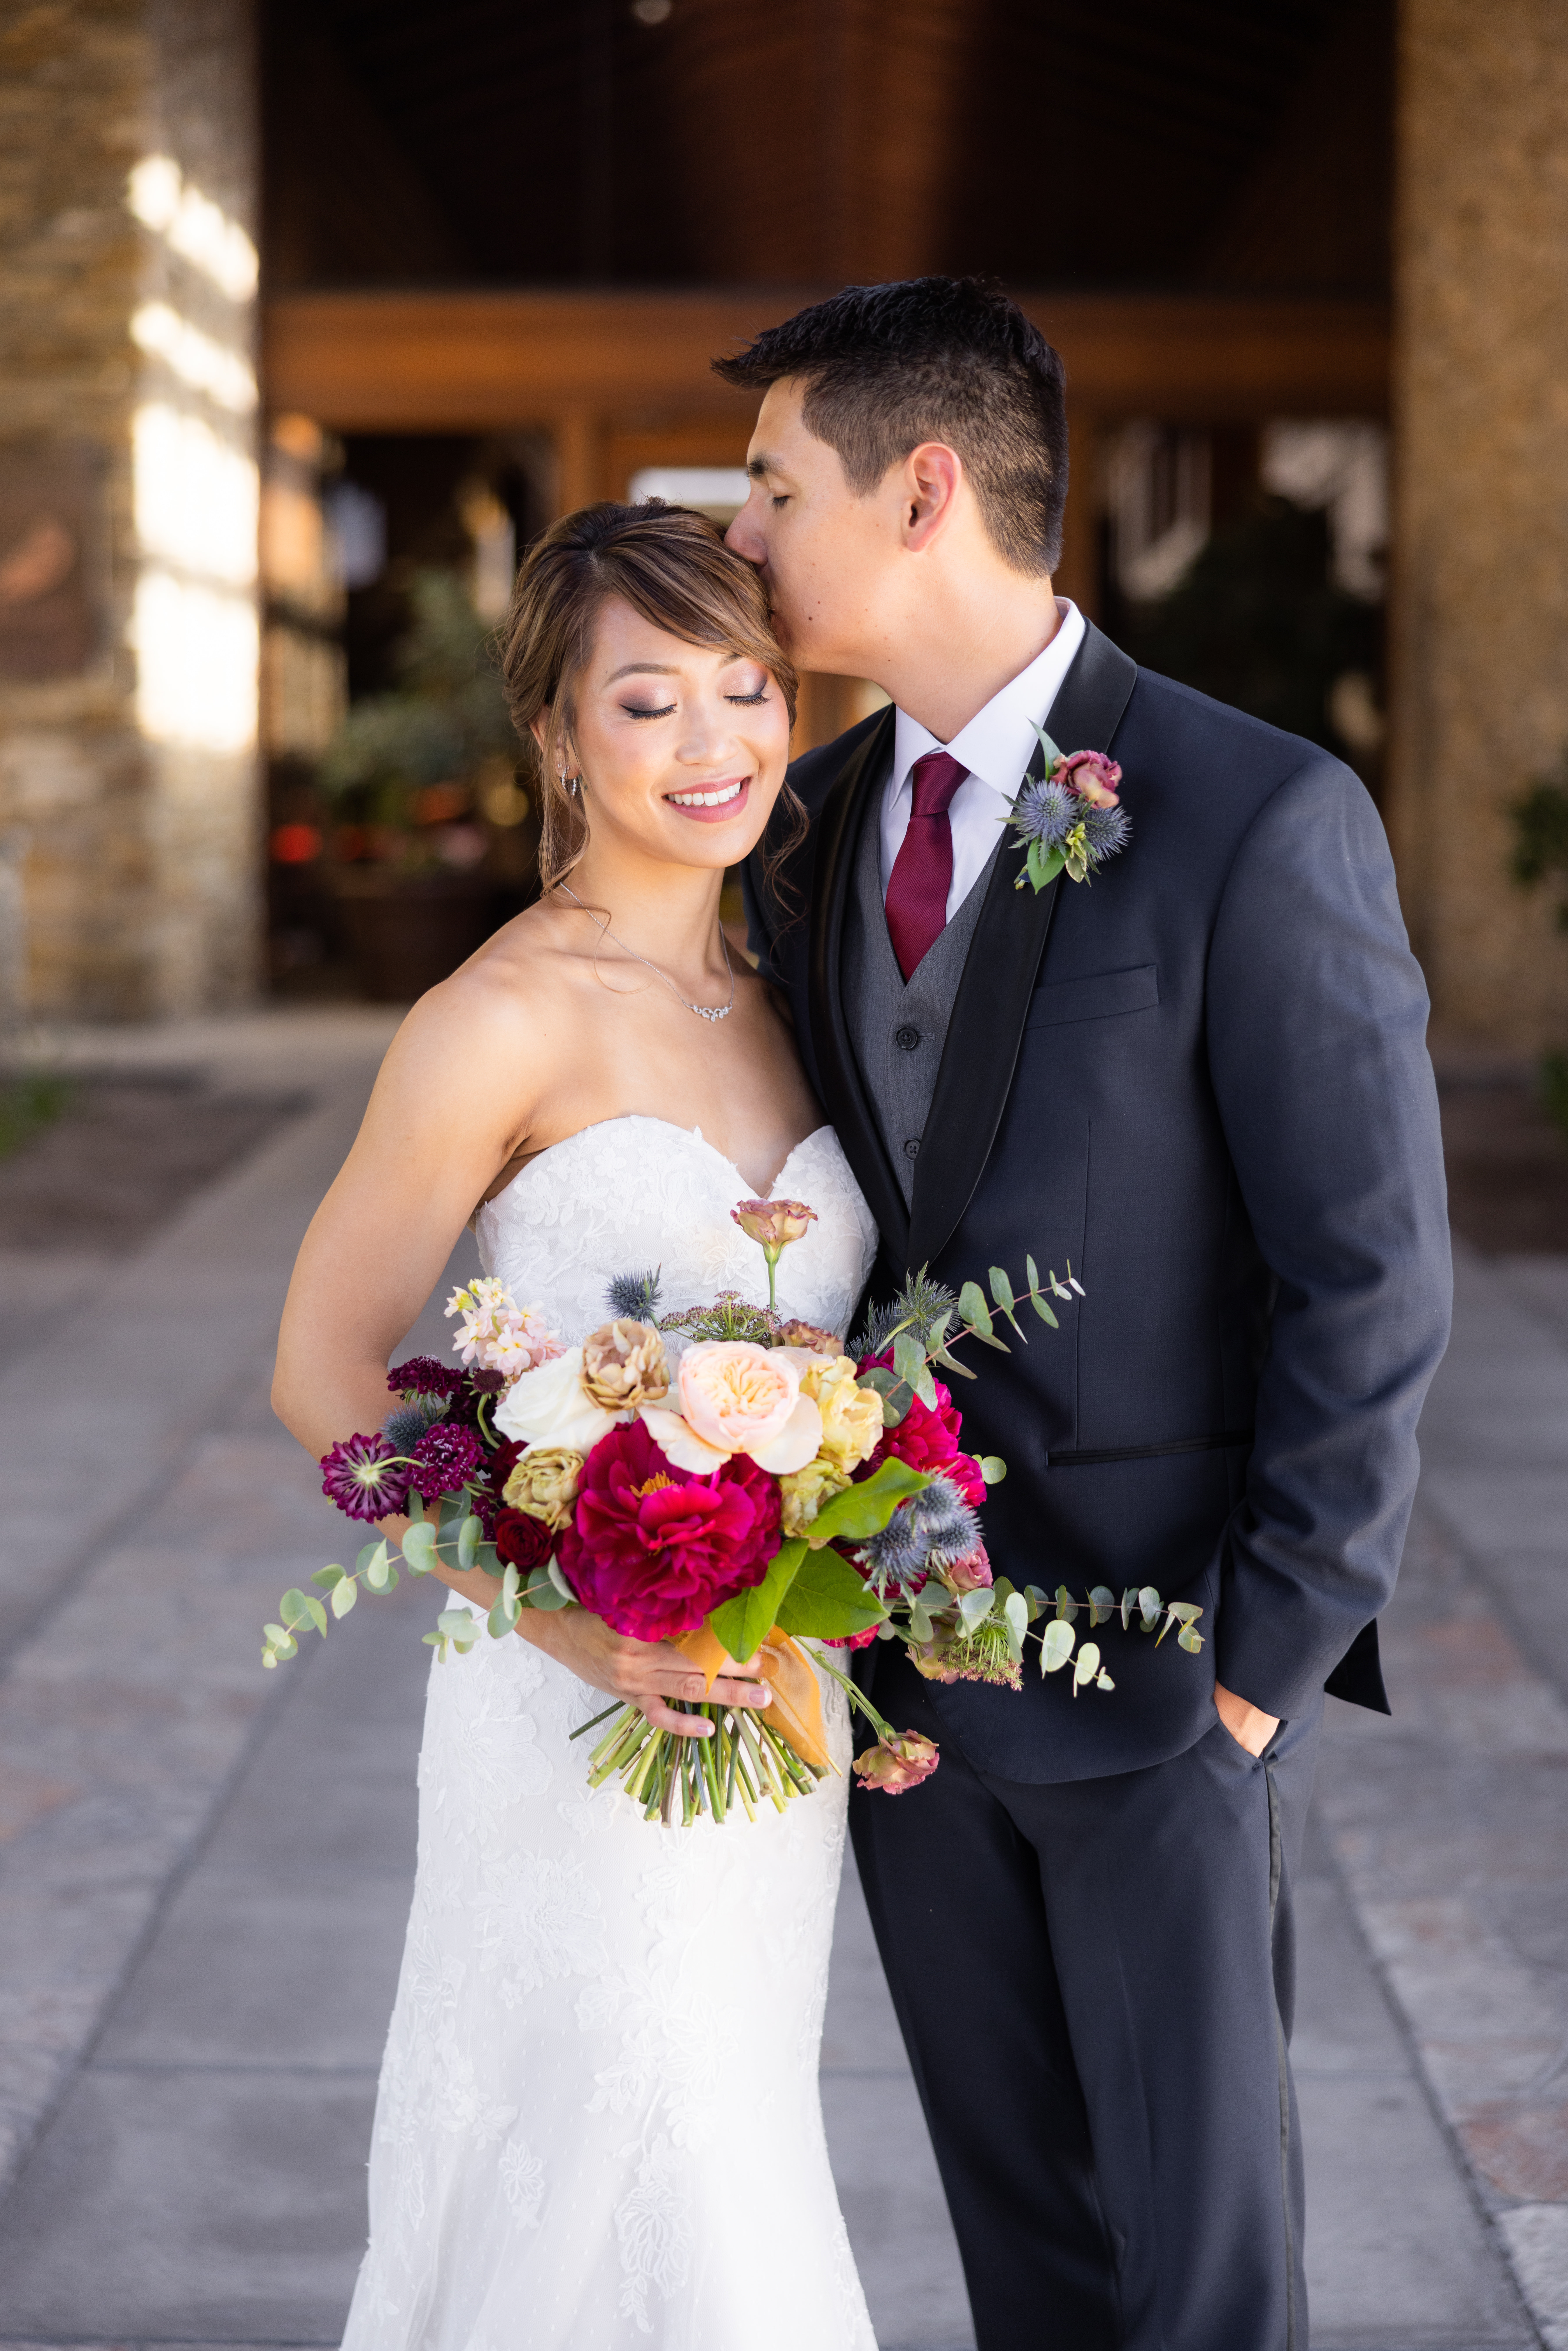 bride in strapless lace wedding dress with jewel toned bridal bouquet stands with groom in navy suit with black lapels, grey vest and maroon tie